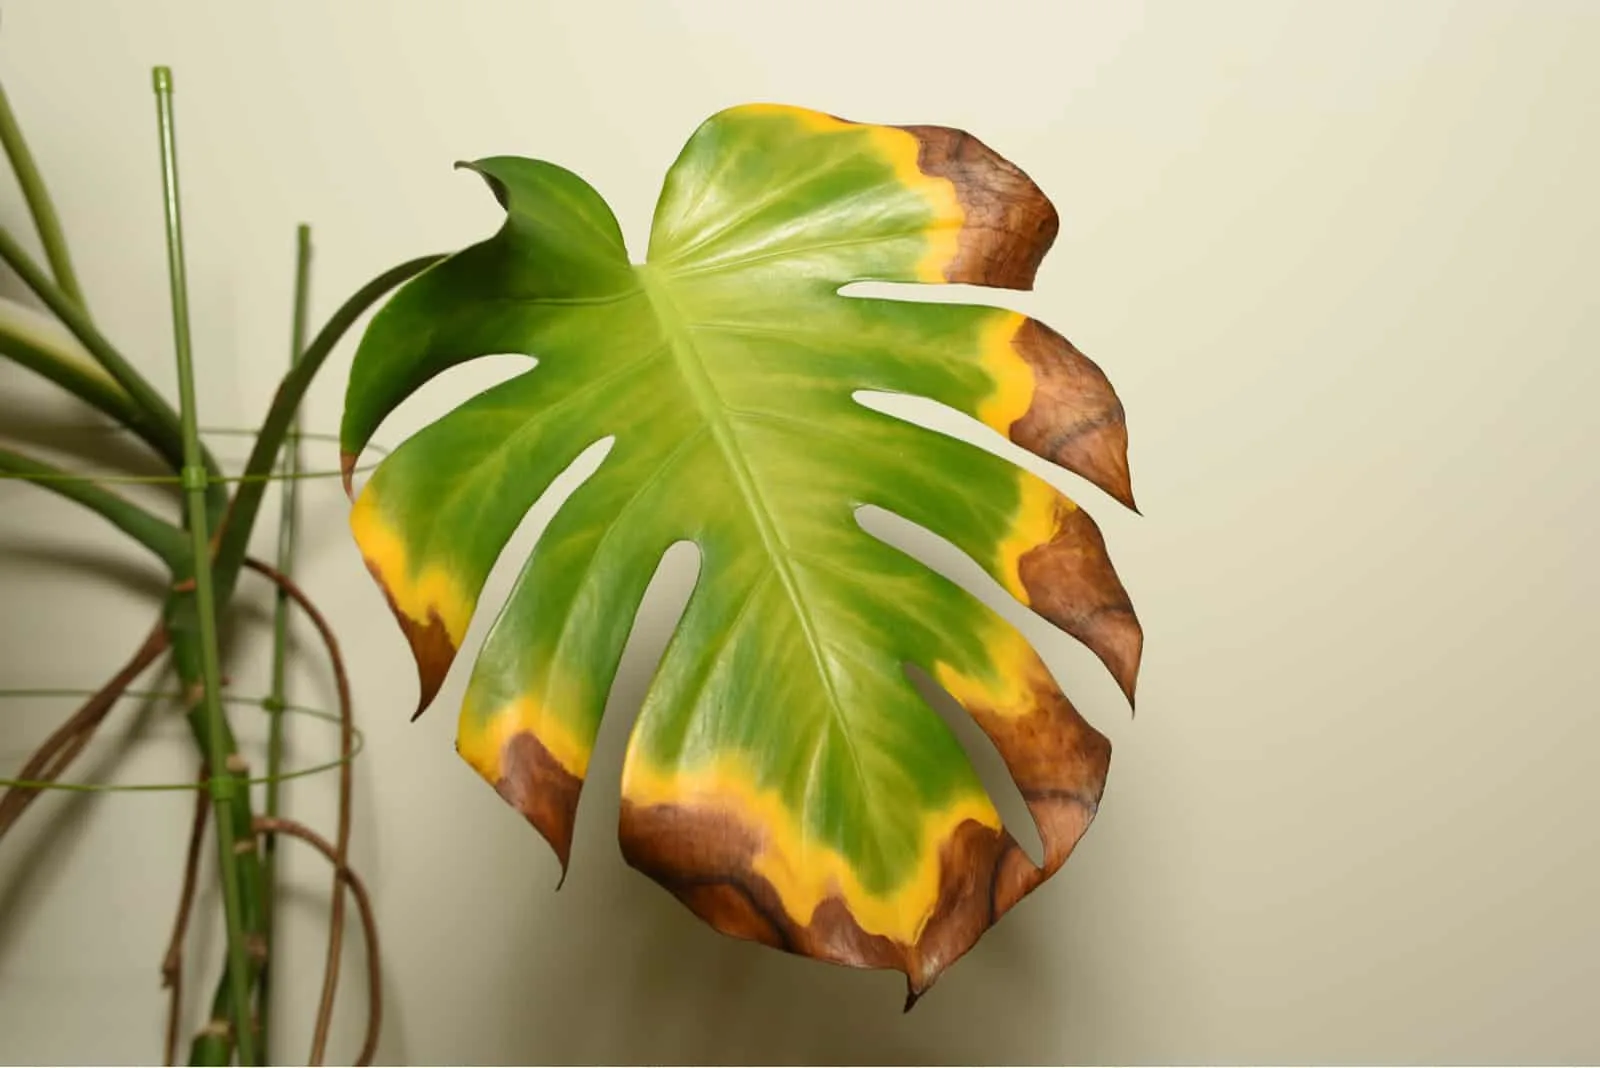 Withering Monstera deliciosa plant leaf